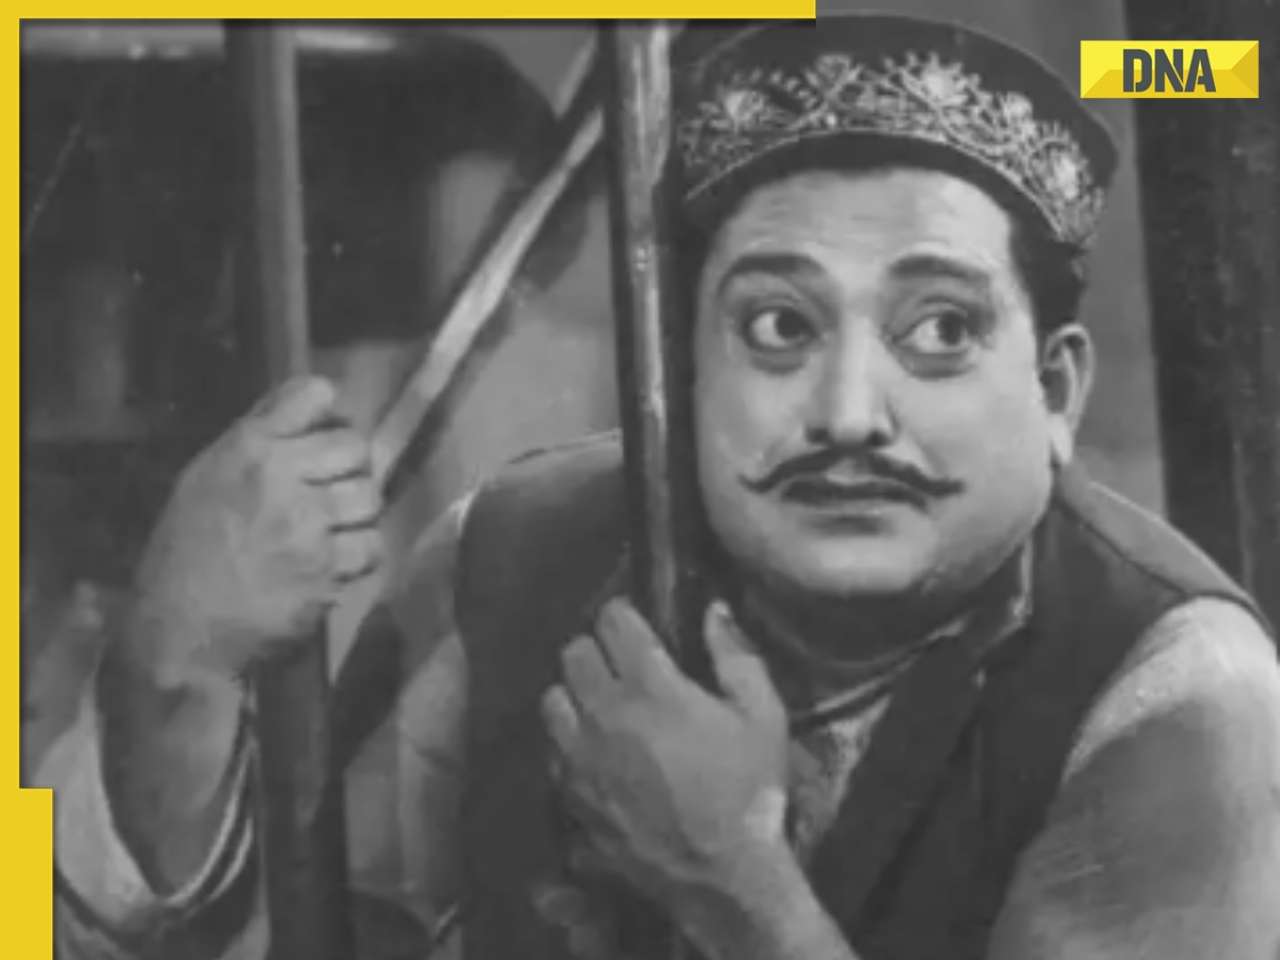 This actor once had 25-room bungalow, 7 cars, then lost everything, died in poverty due to...